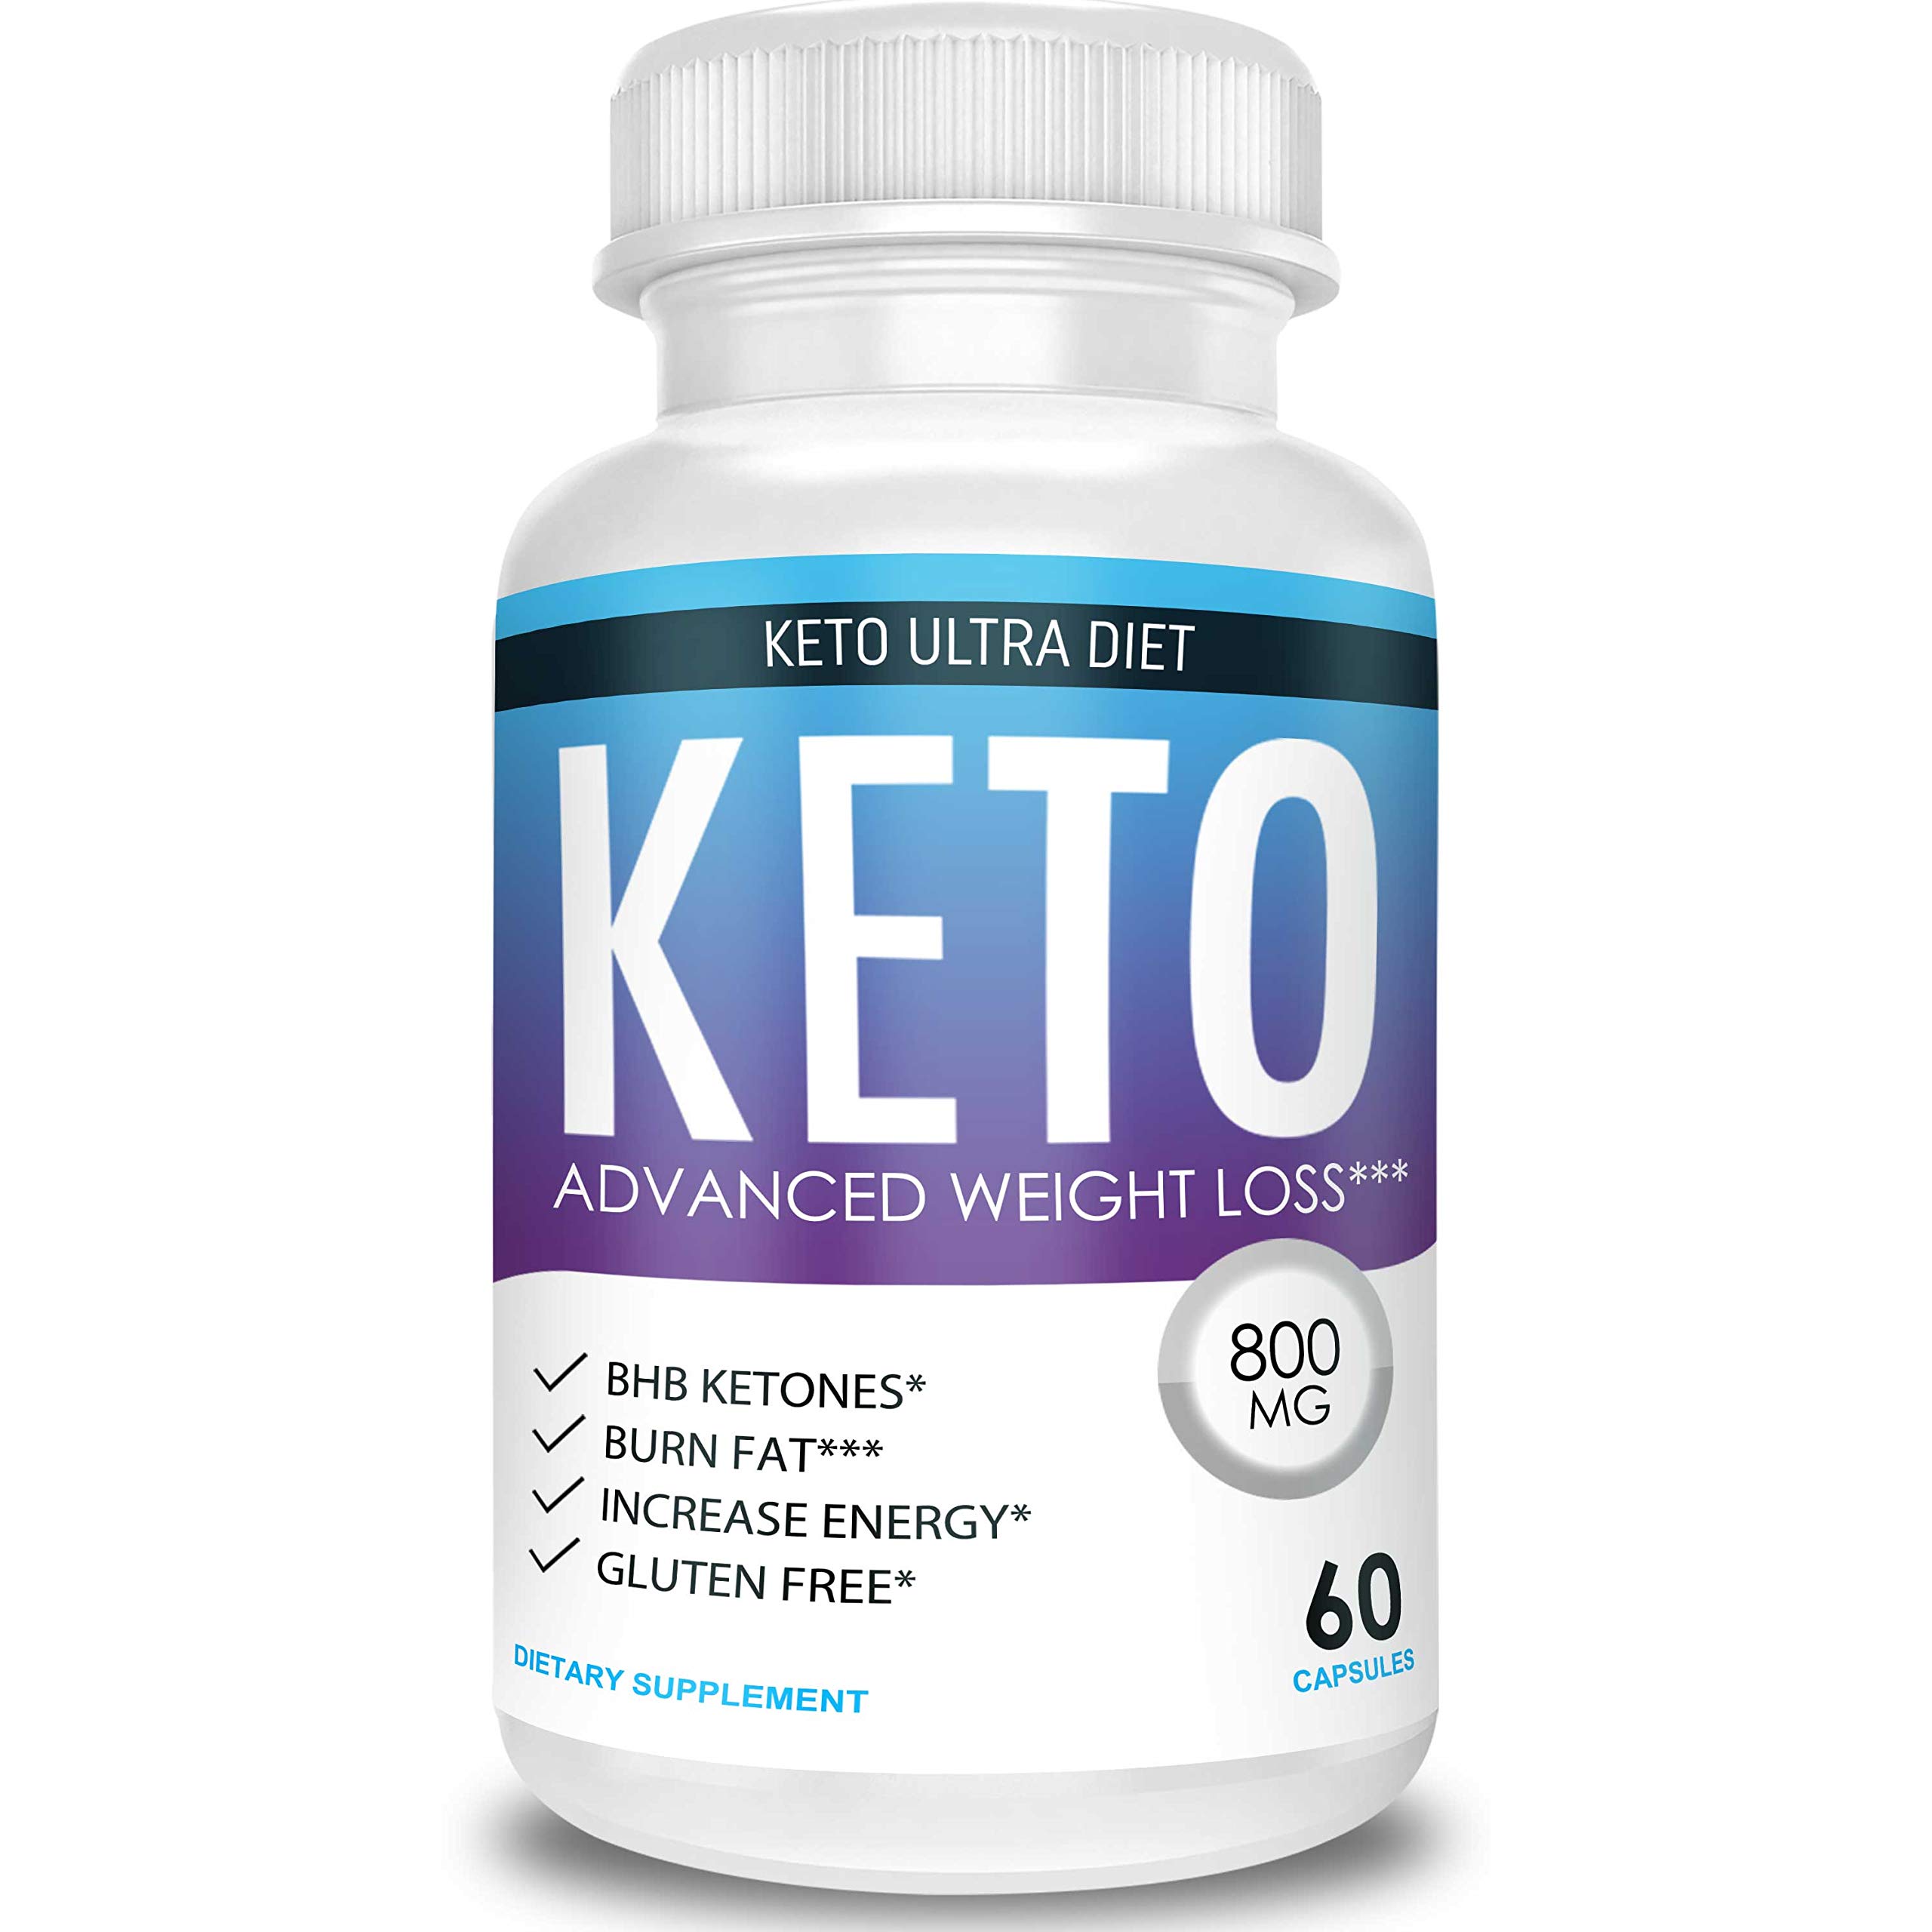 3. Is Keto Advance a Risky Option for Weight Loss?